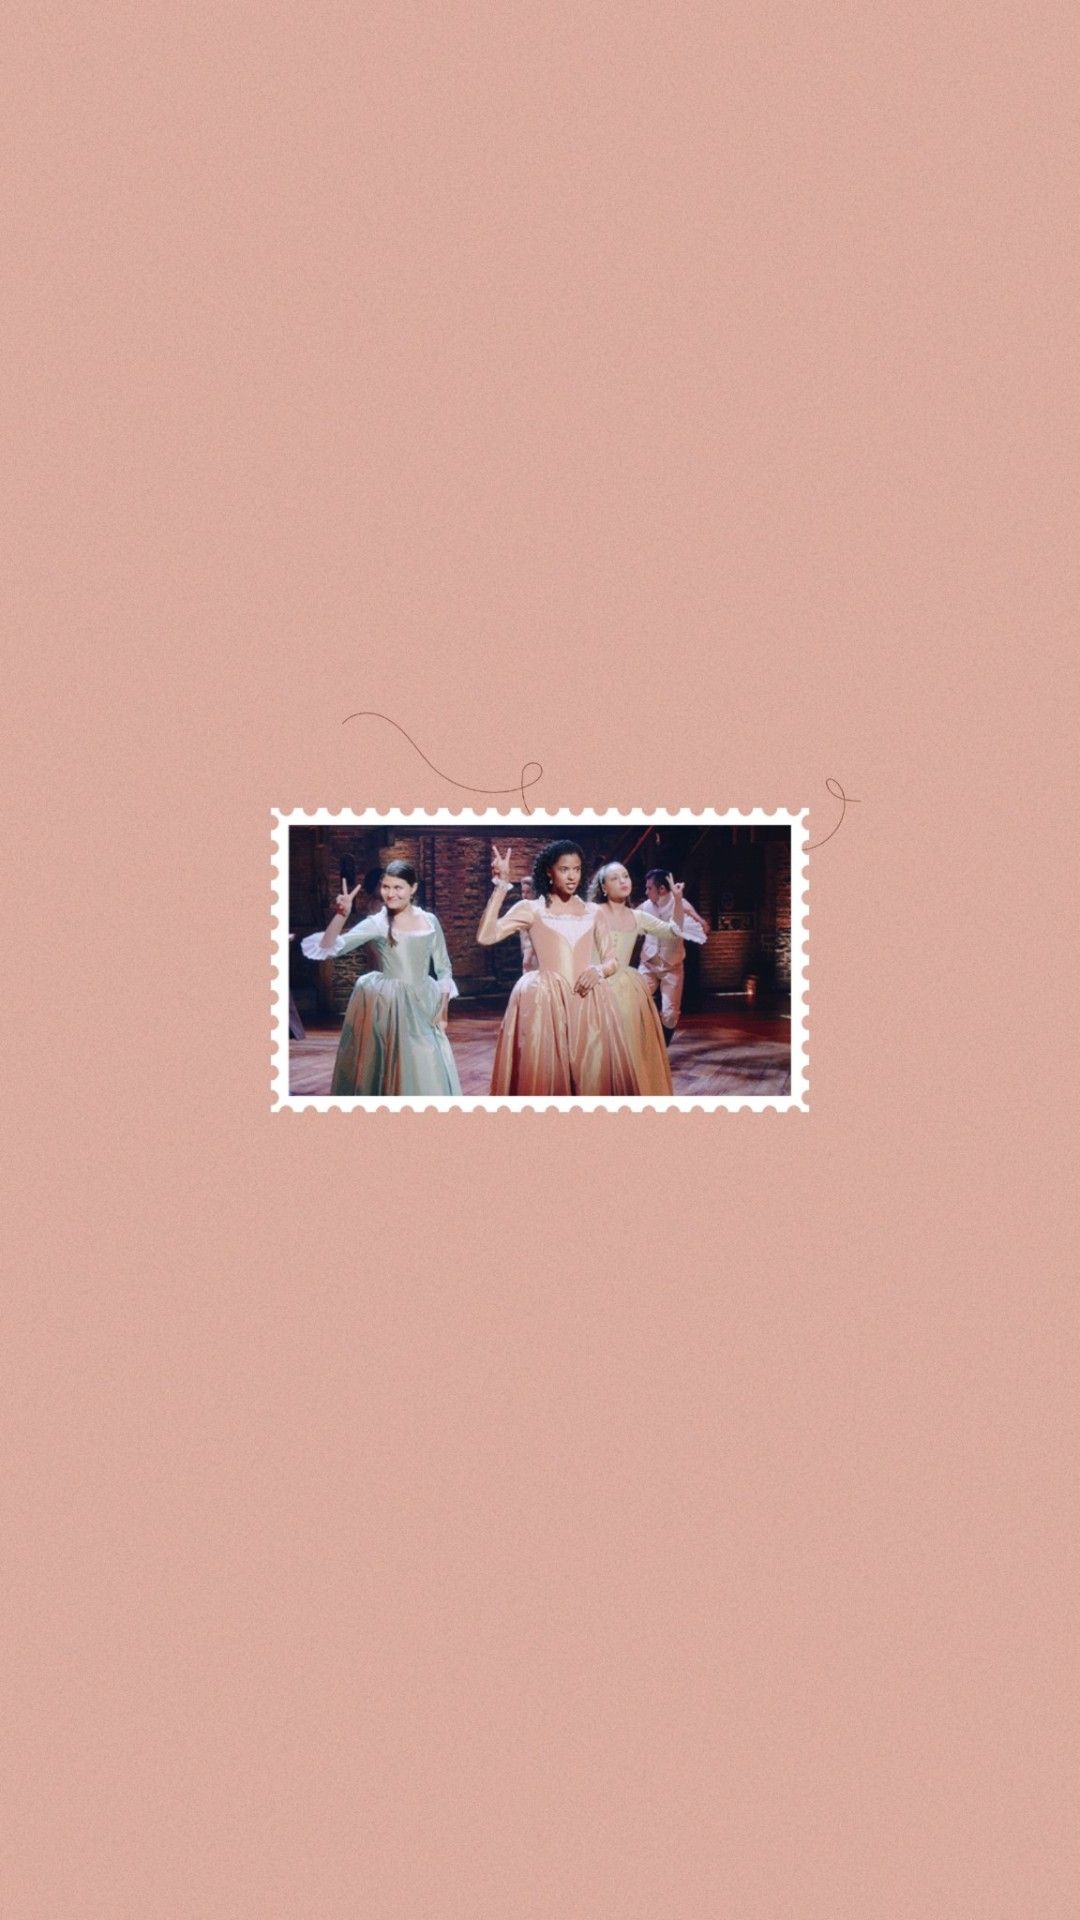 IPhone wallpaper with a picture of the Schuyler sisters from Hamilton. - Hamilton